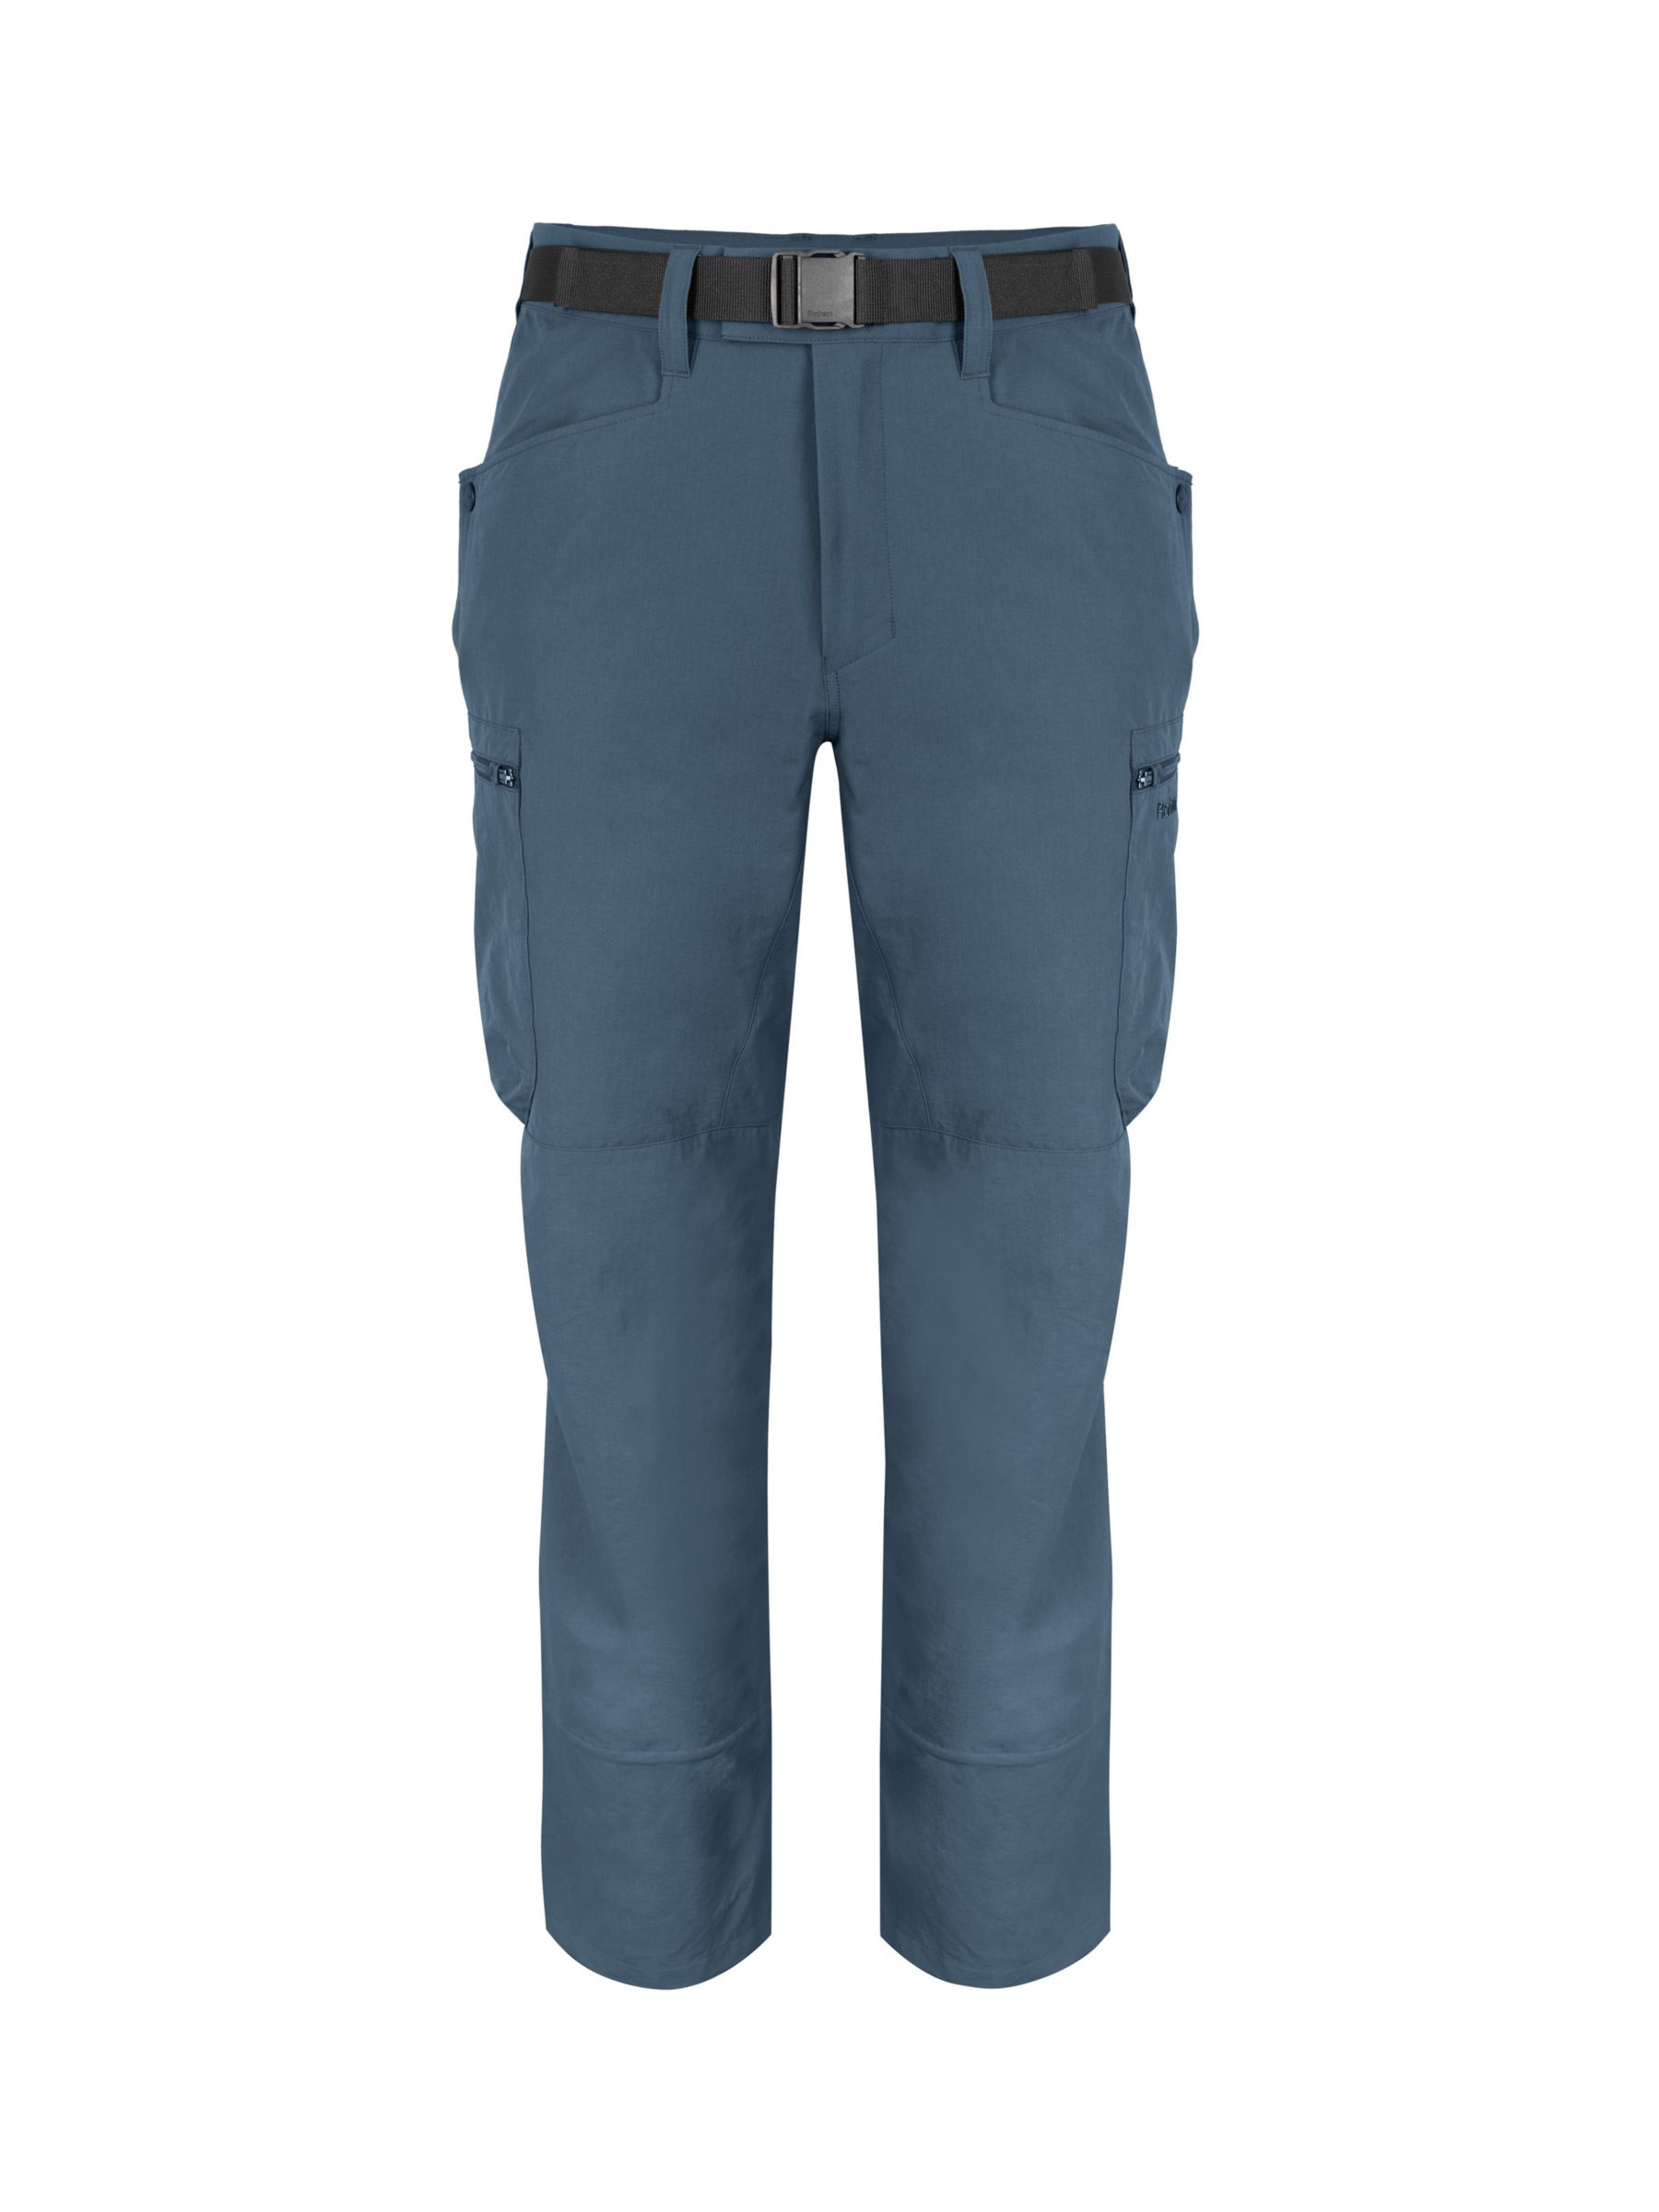 Buy Rohan Frontier Anti Insect Expedition Trousers Online at johnlewis.com